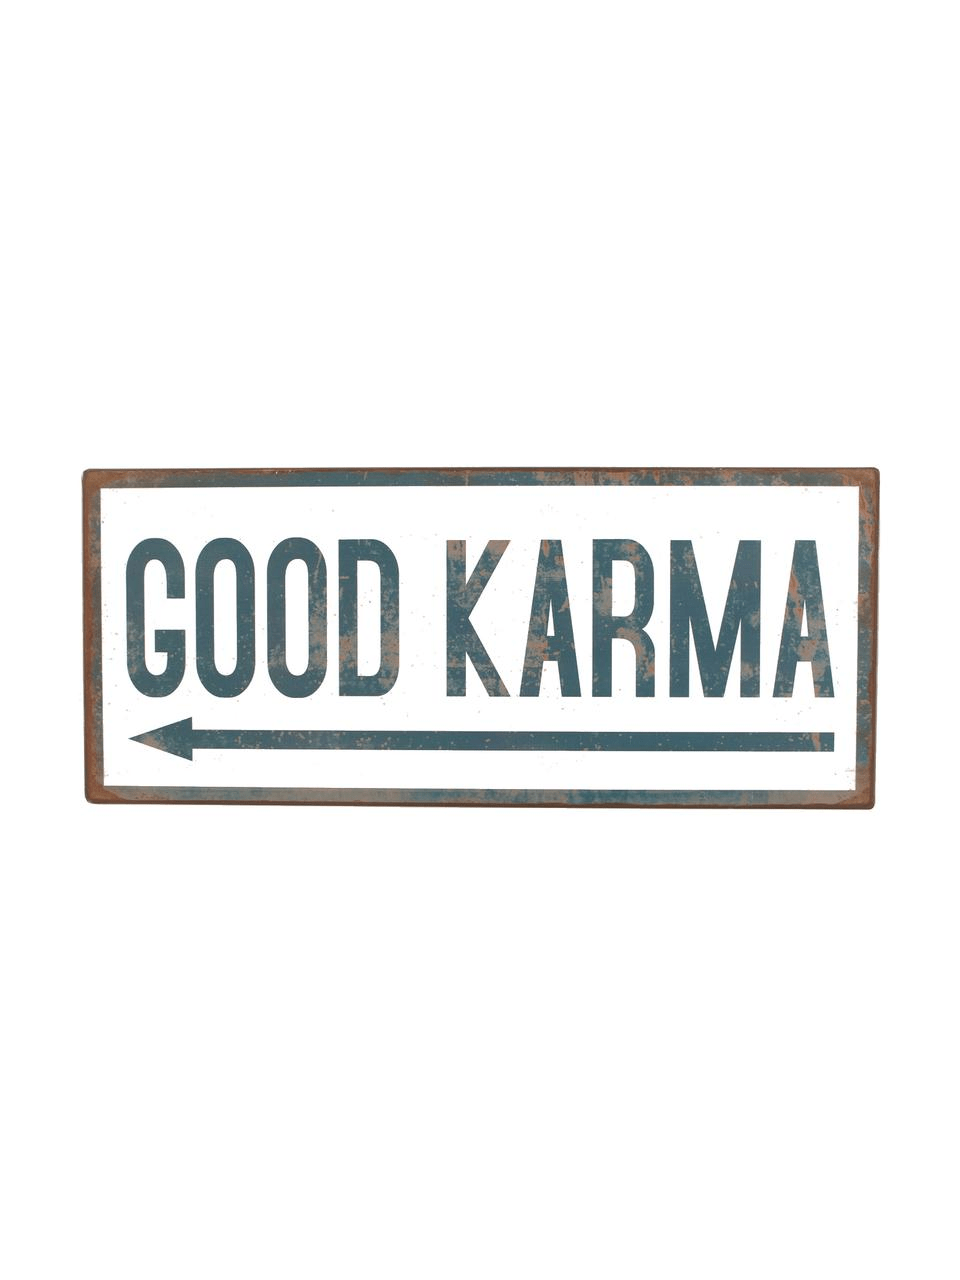 Are you a good person? You will be rewarded for your efforts by the universe. Karma has deep roots in Buddhism and Hinduism, teaching that the total of your honourable deeds in this life will affect you in the next. The sum of all your evils may follow you forever unless you compensate.